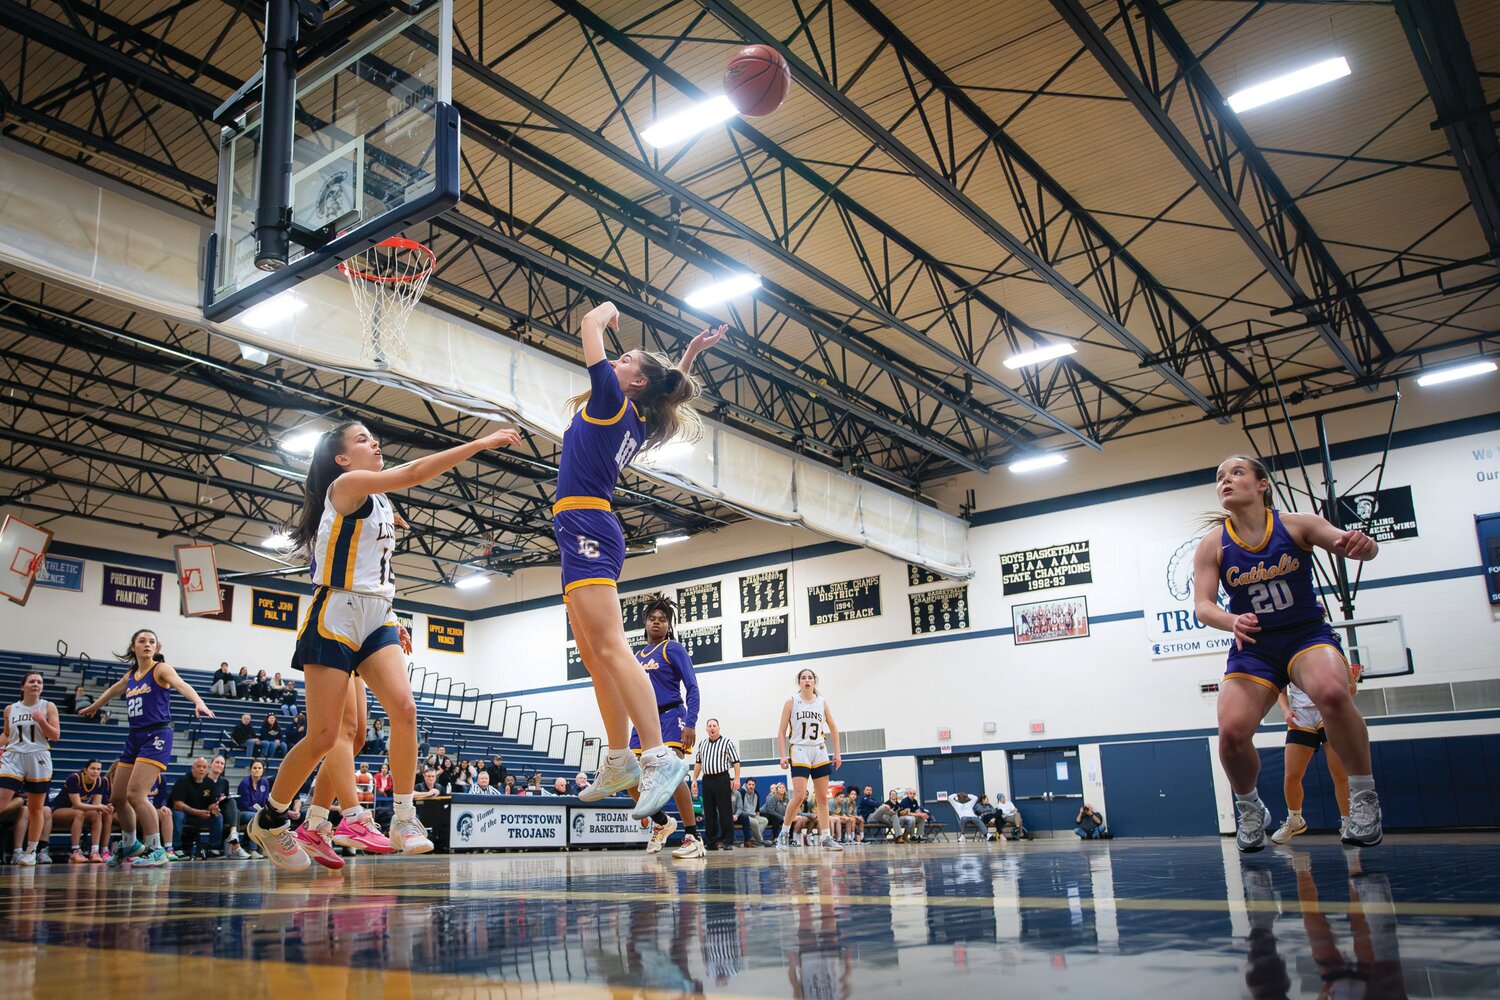 New Hope-Solebury Isabella Elizondo gets off a pass over the leaping Lily Lehman of Lancaster Catholic in the second quarter.